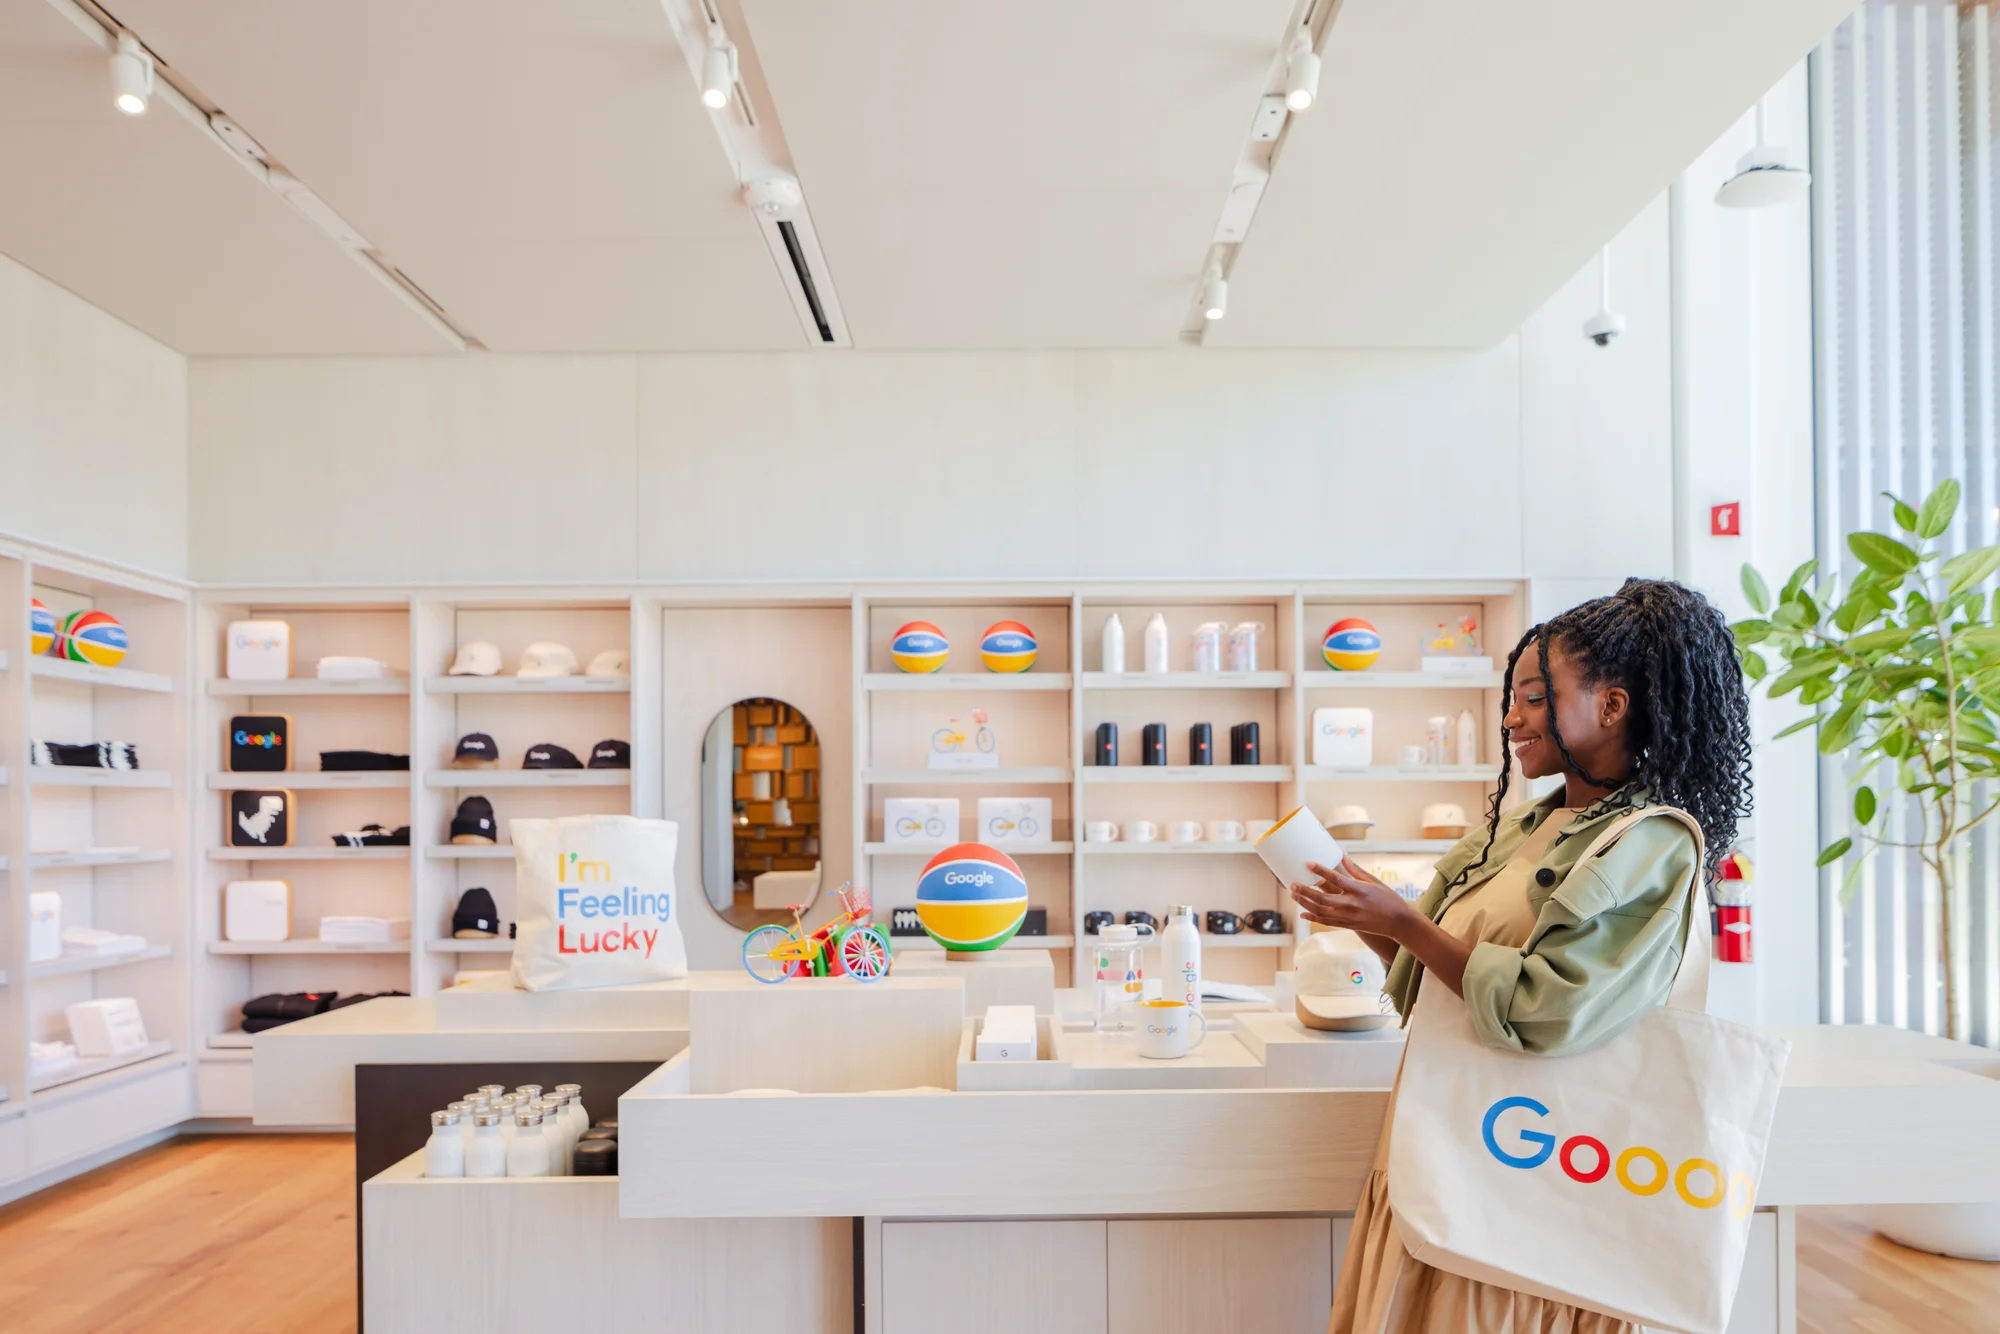 A photo of the interior of the Google Store with a woman standing in front of a display wall and table of Google-branded merchandise. She is holding up a Google-branded mug.